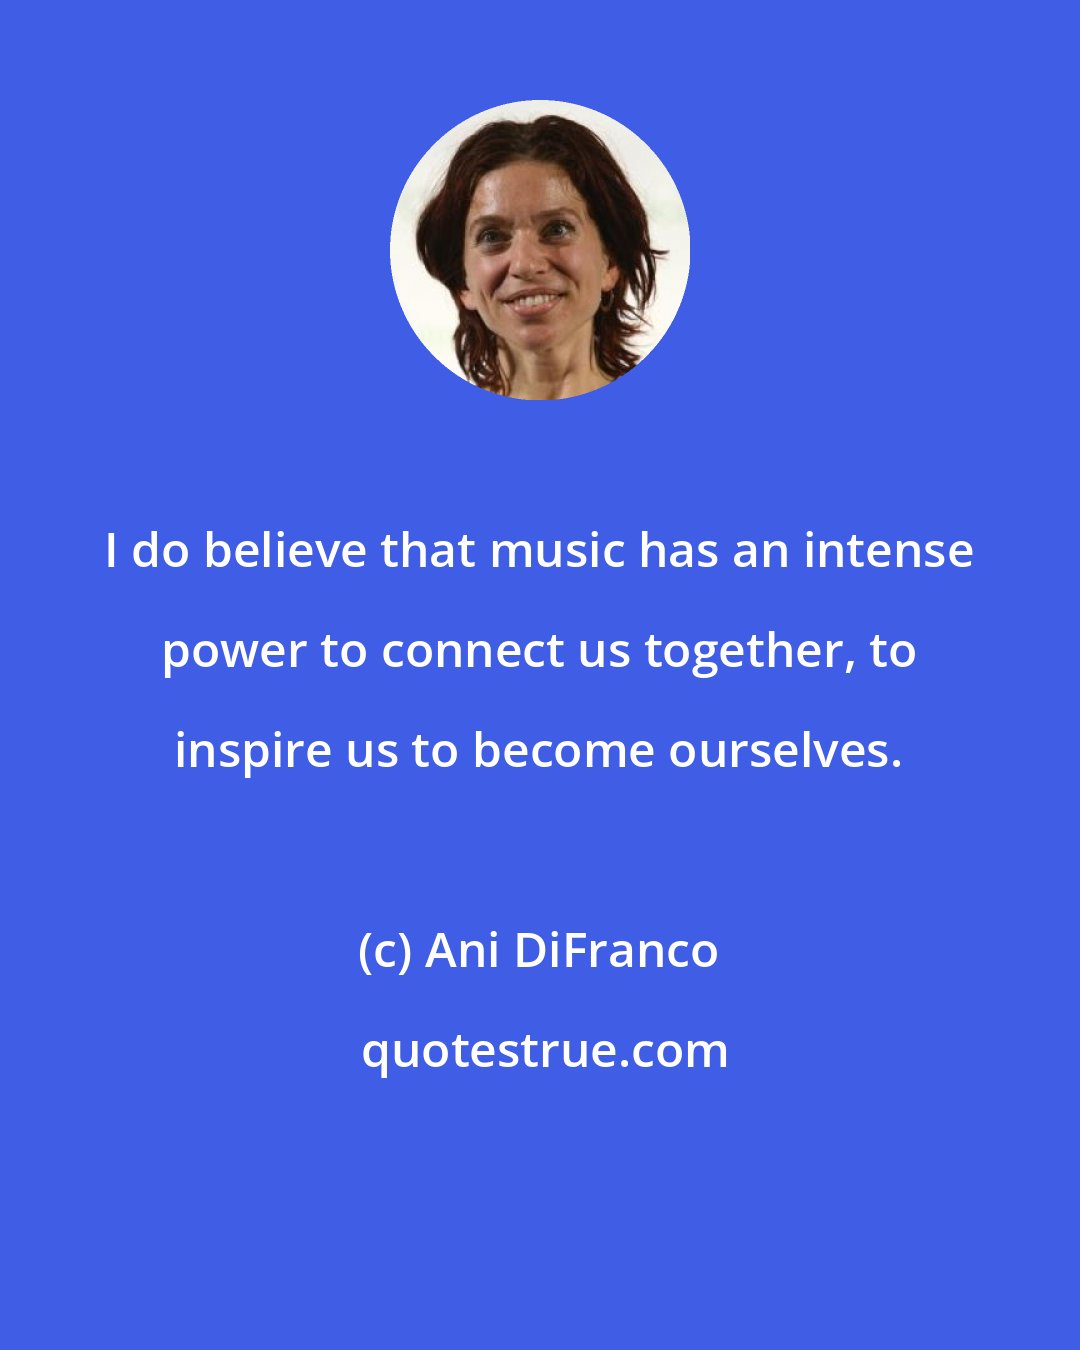 Ani DiFranco: I do believe that music has an intense power to connect us together, to inspire us to become ourselves.